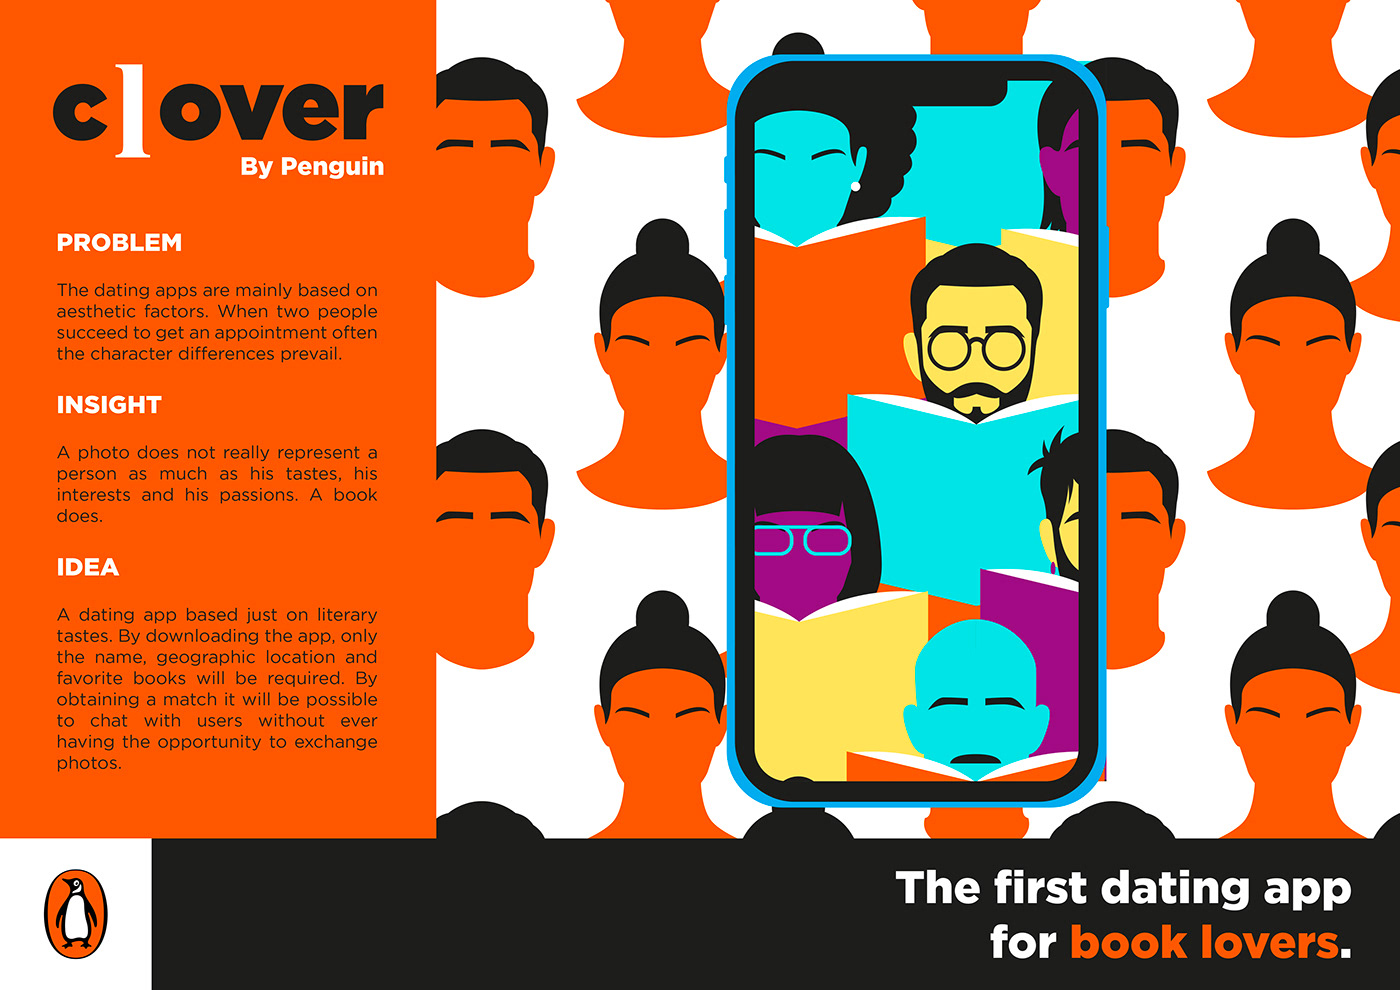 Clover - The First Dating App For Book Lovers on Behance